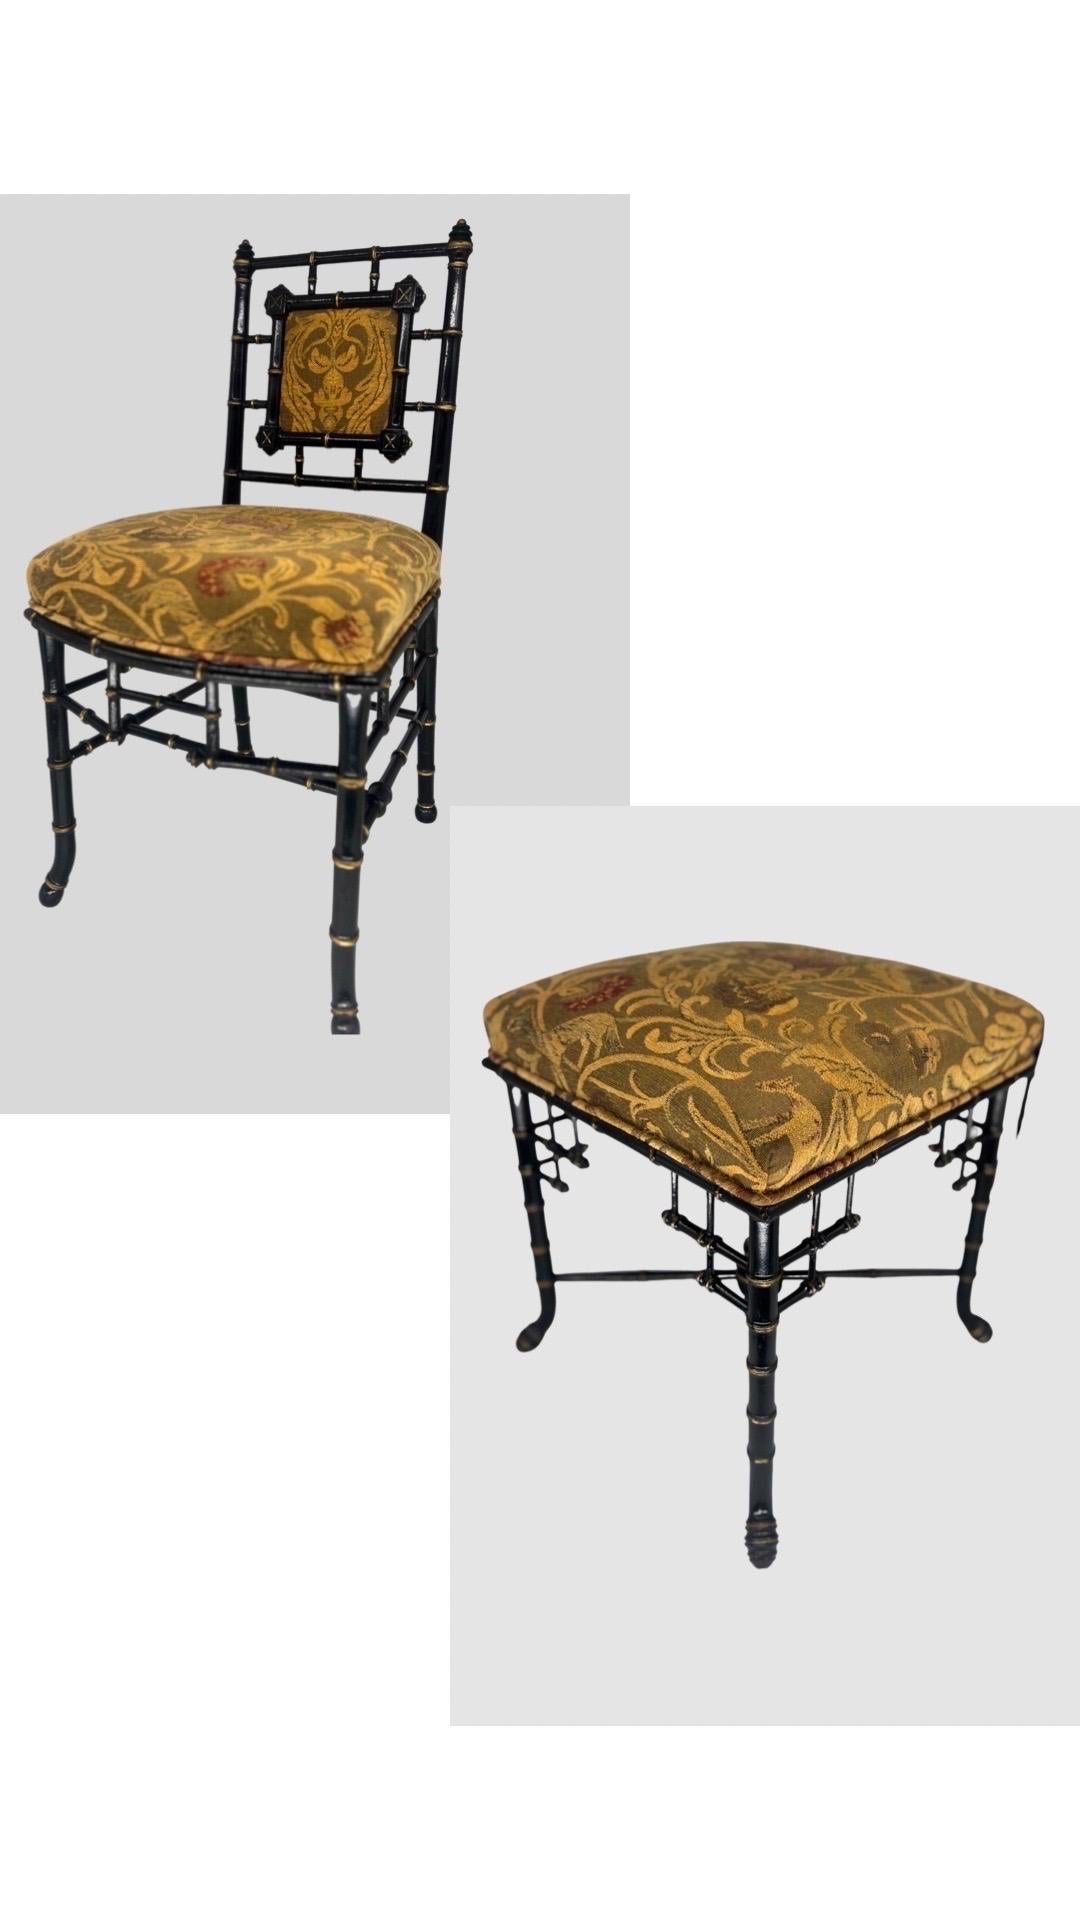 Exquisite Antique Aesthetic Movement Faux Bamboo Side Chair and Ottoman, ATTR: Herter Brothers

This listing is for the TWO PIECES. 

*Please View Other Listings - Matching Piano Stool* - Or sold individually. 

Presenting an exceptional piece of